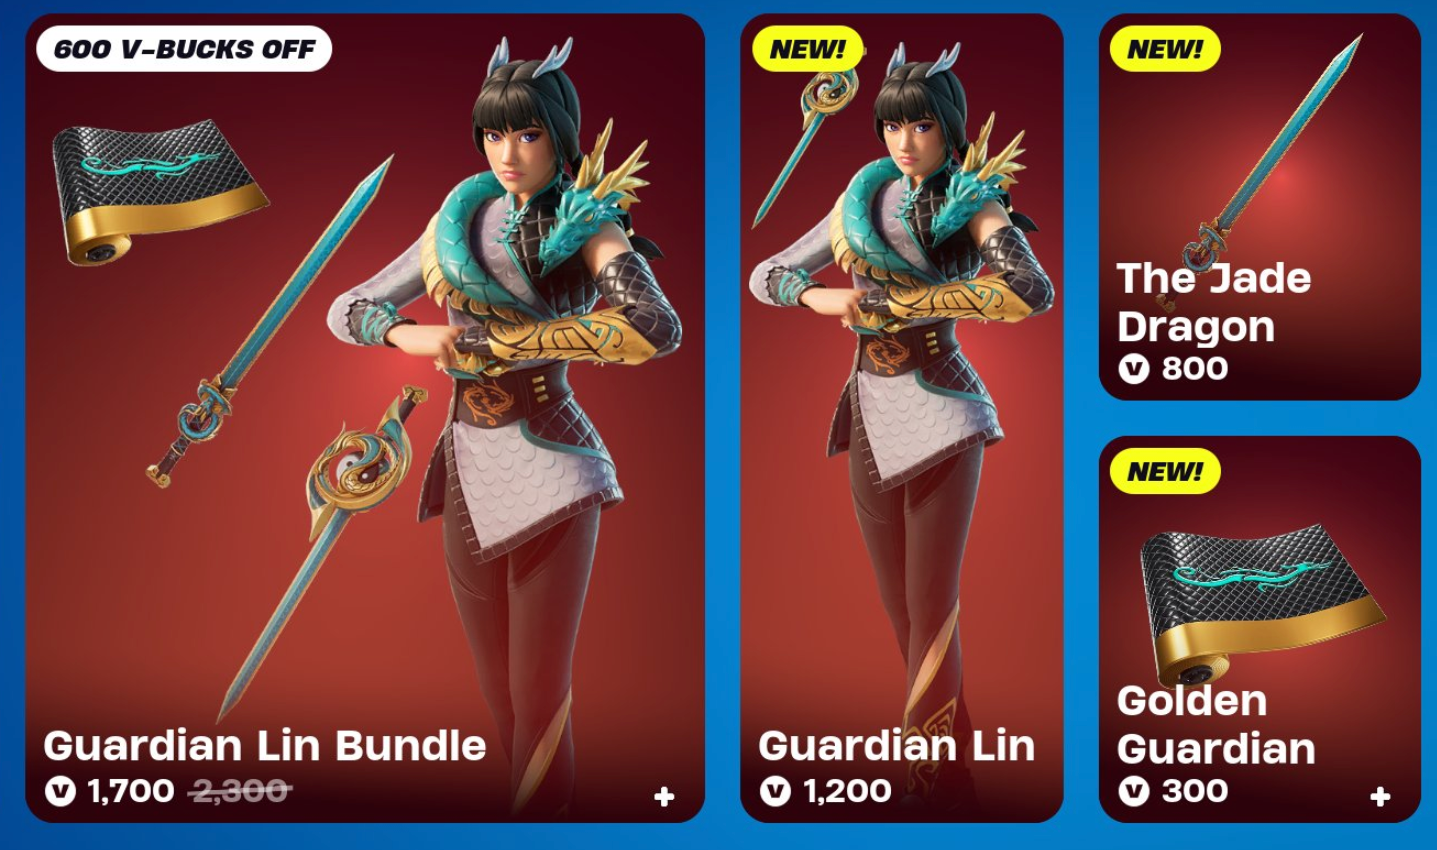 New Guardian Lin Outfit Available Now